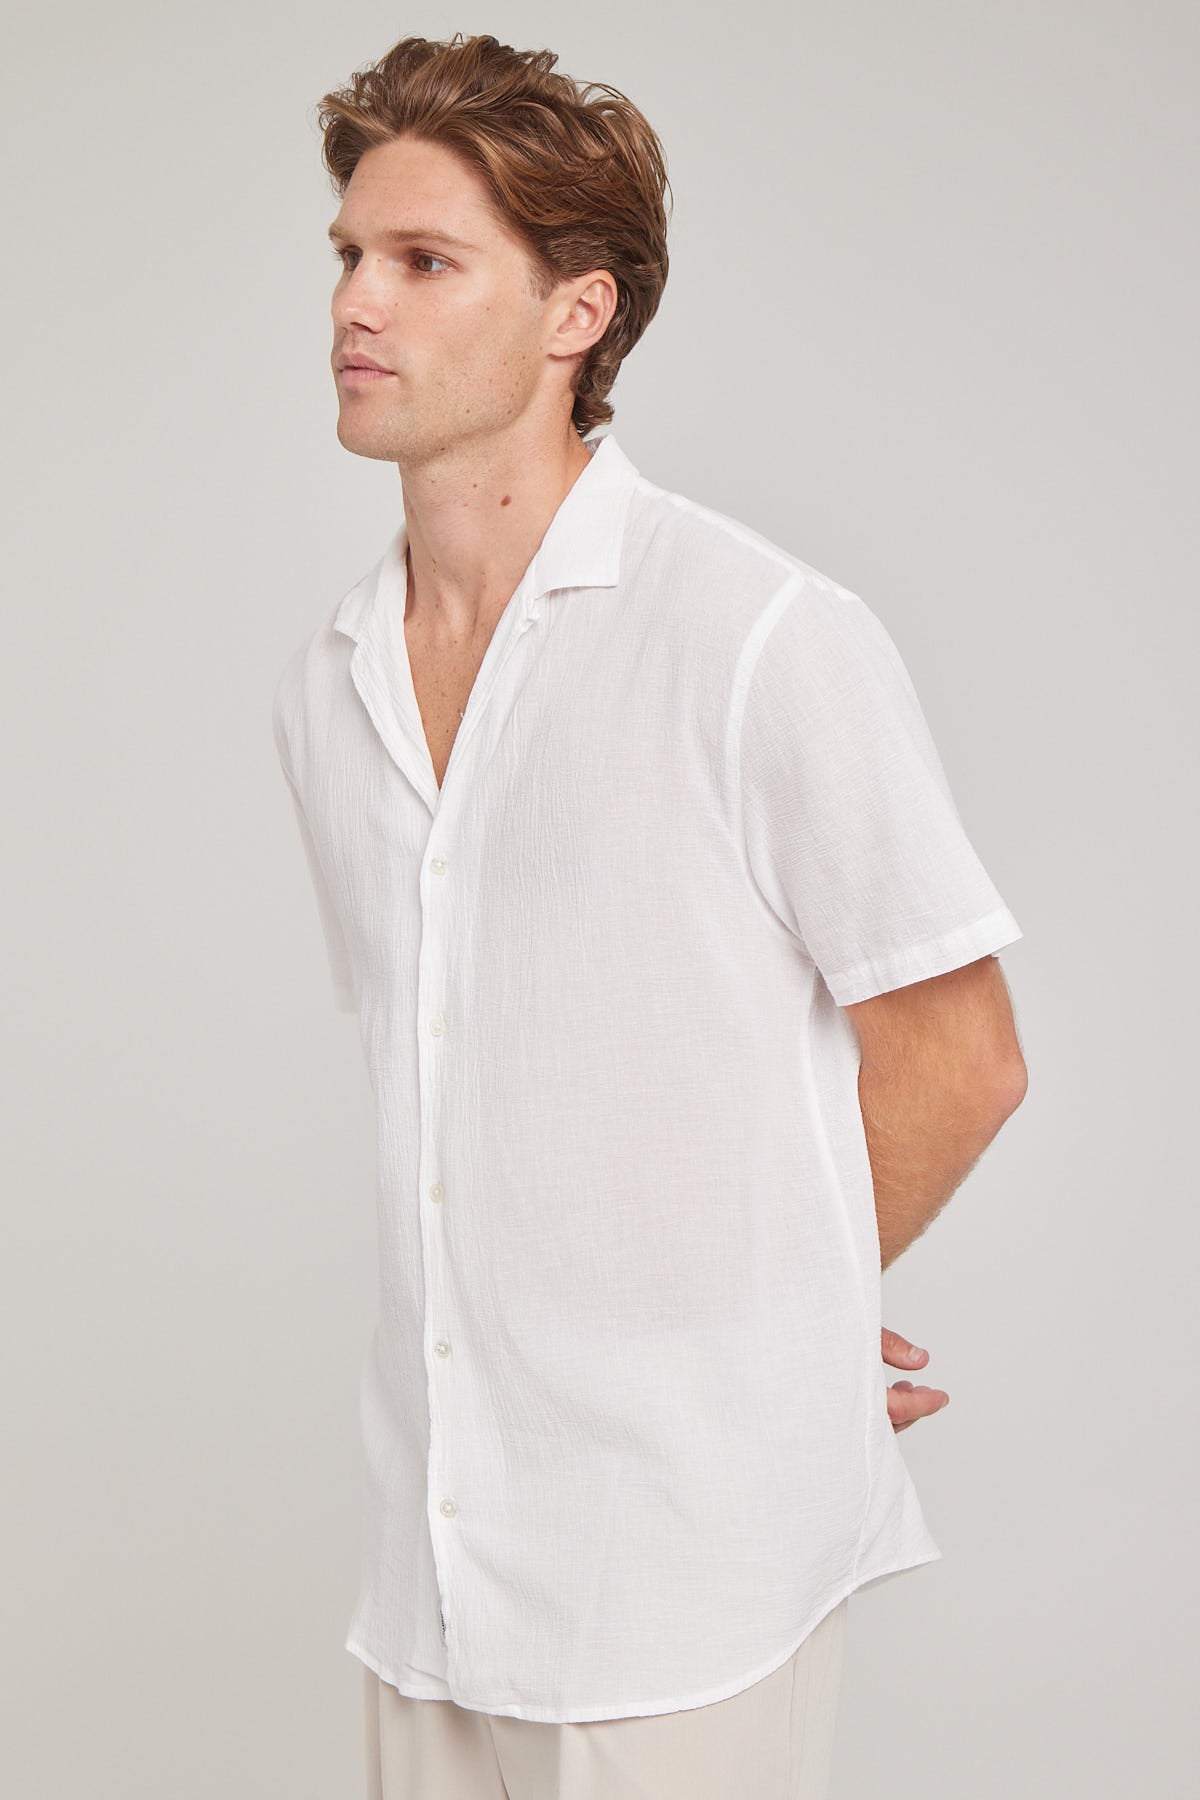 Buy White Shirts for Men by Vooter Online